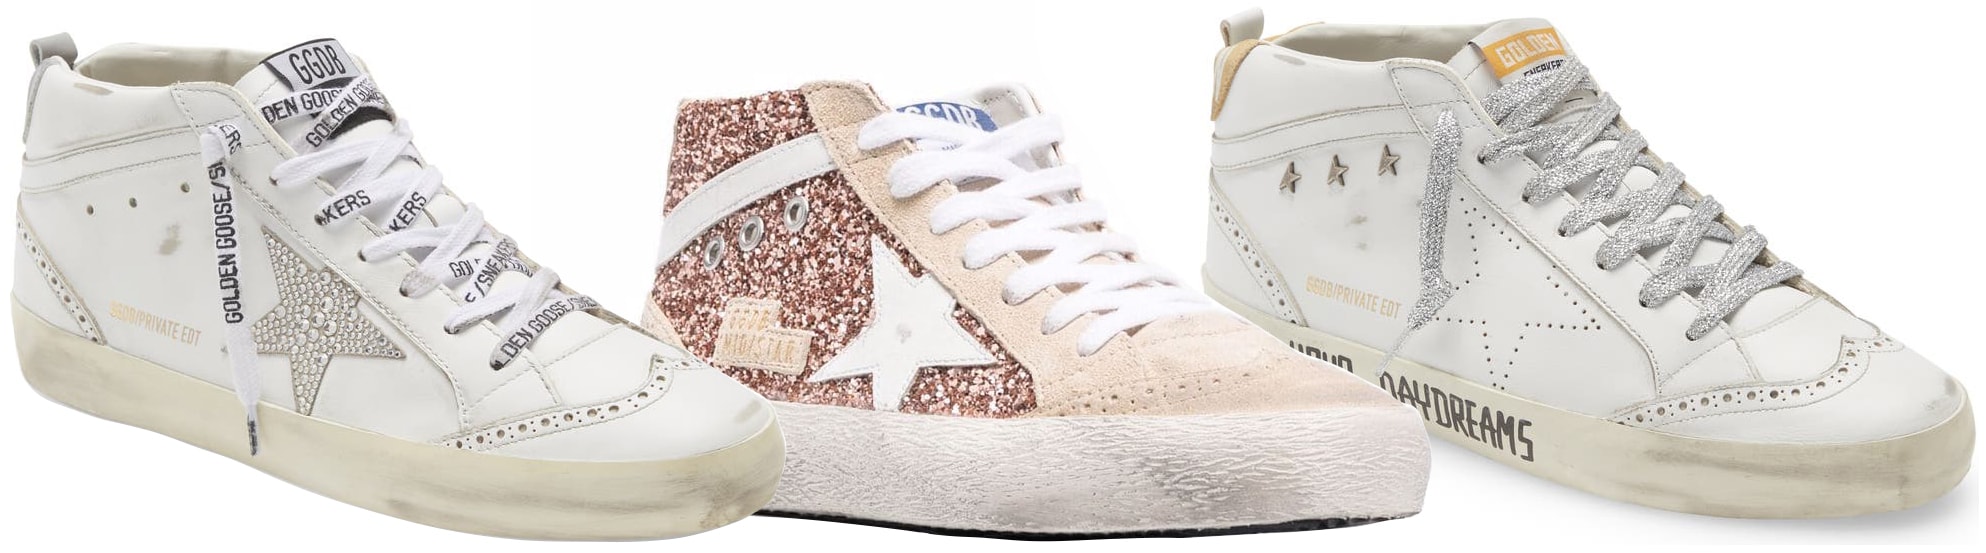 Golden Goose sneakers have gained popularity for their unique and vintage-inspired aesthetic